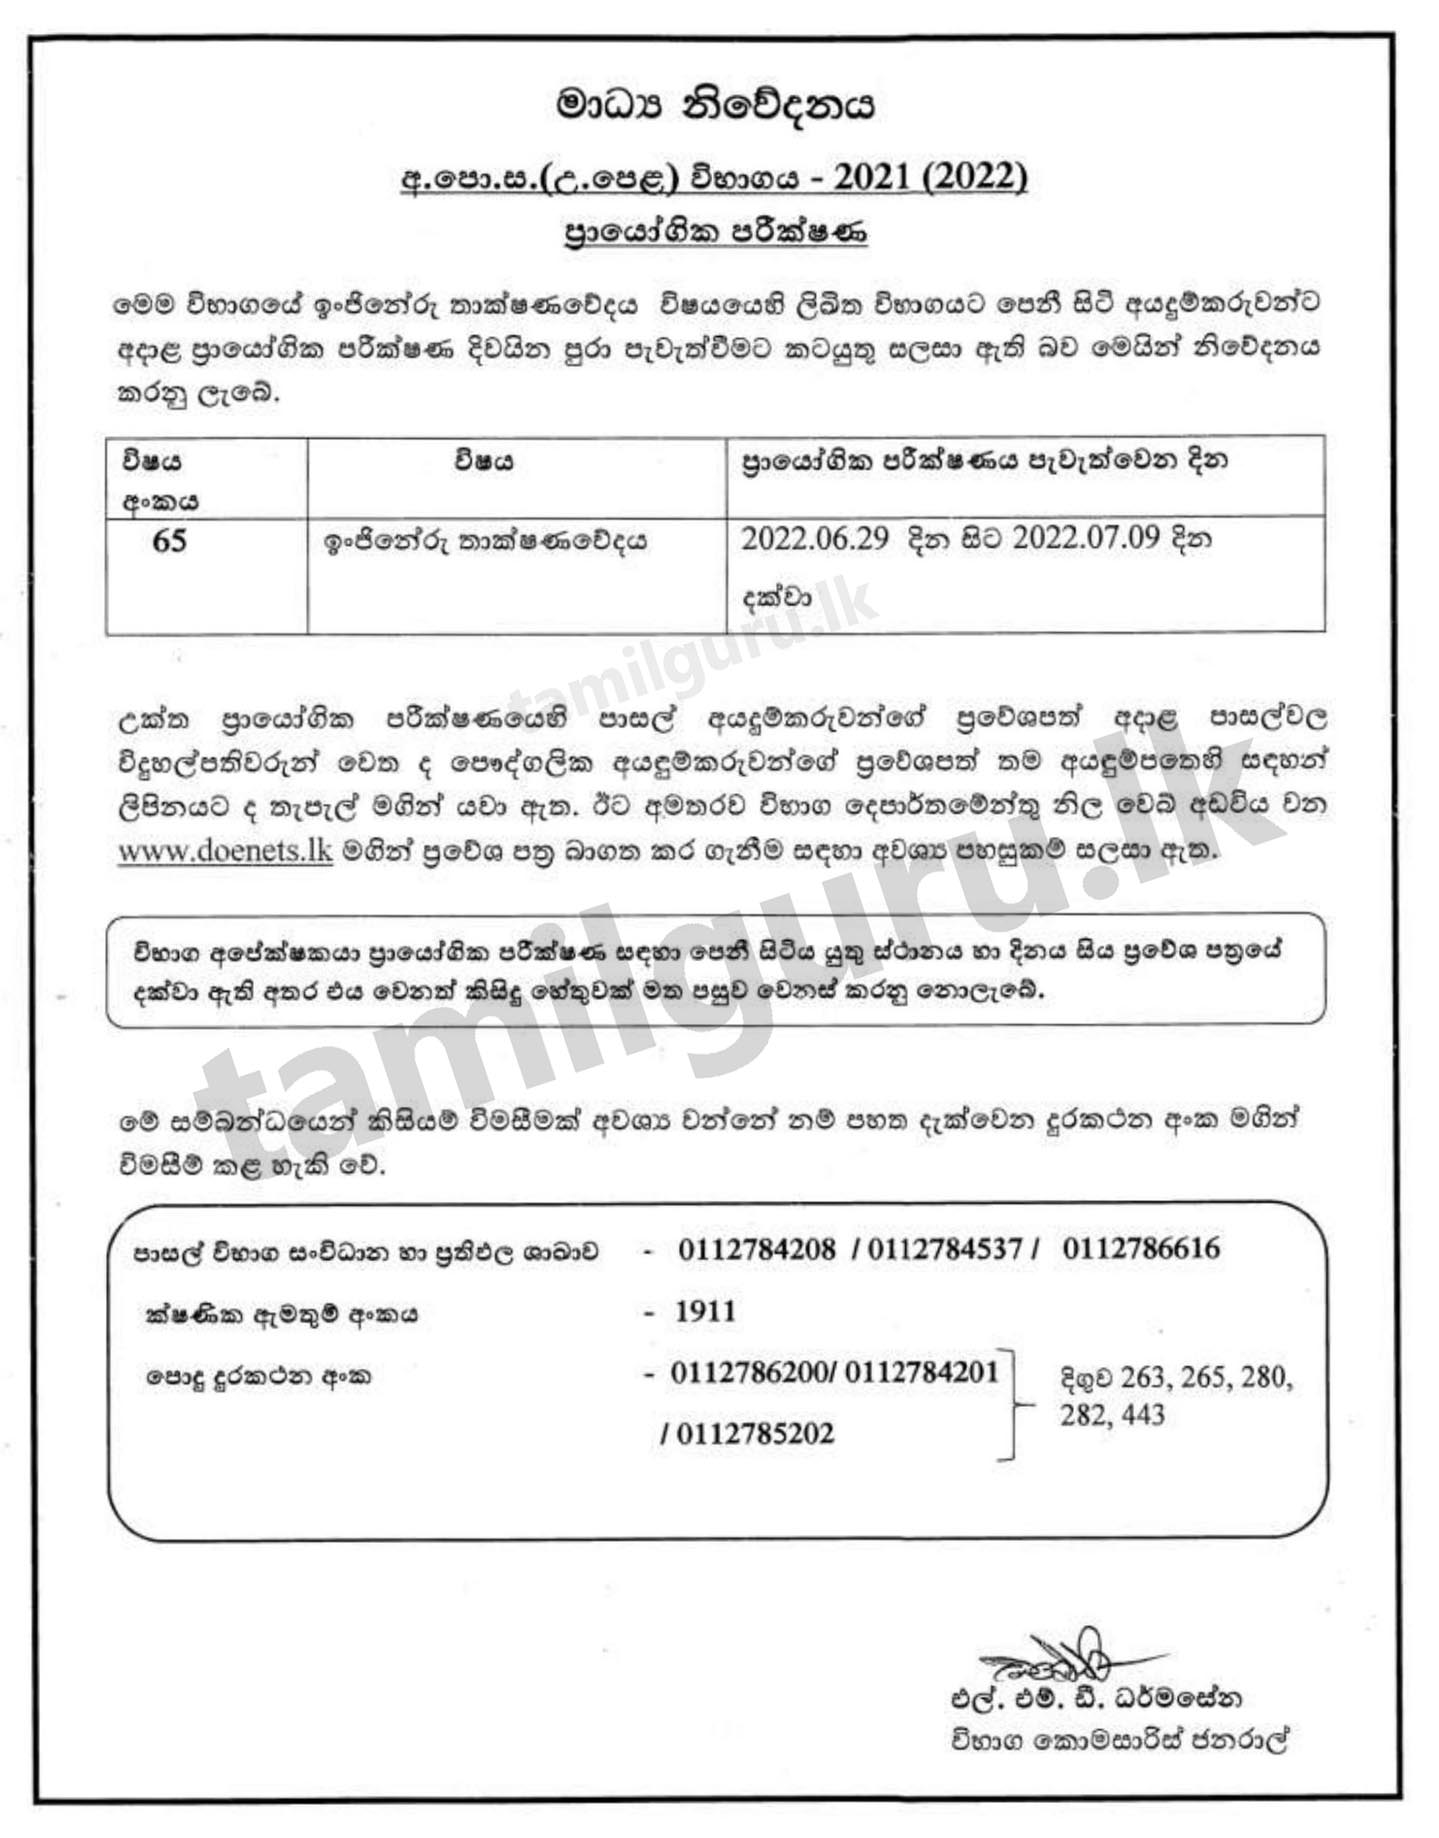 Practical Tests (Engineering Technology) - G.C.E. A/L Examination 2021 (2022) (Details in Sinhala)